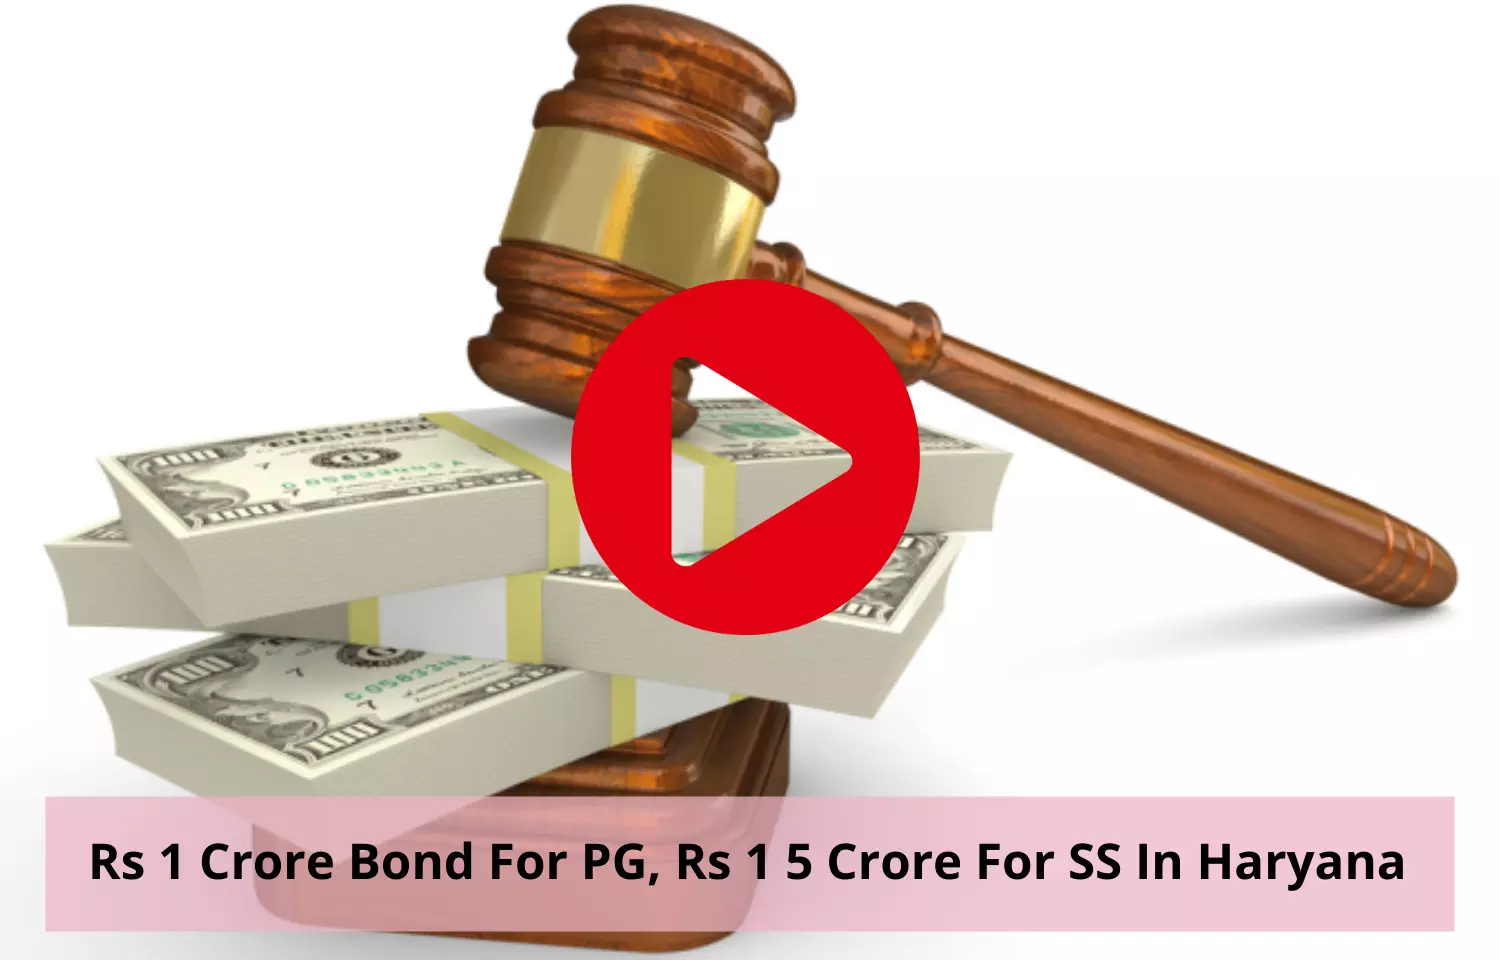 Rs 1.5 crore bond for SS, Rs 1 Crore for PG in Haryana